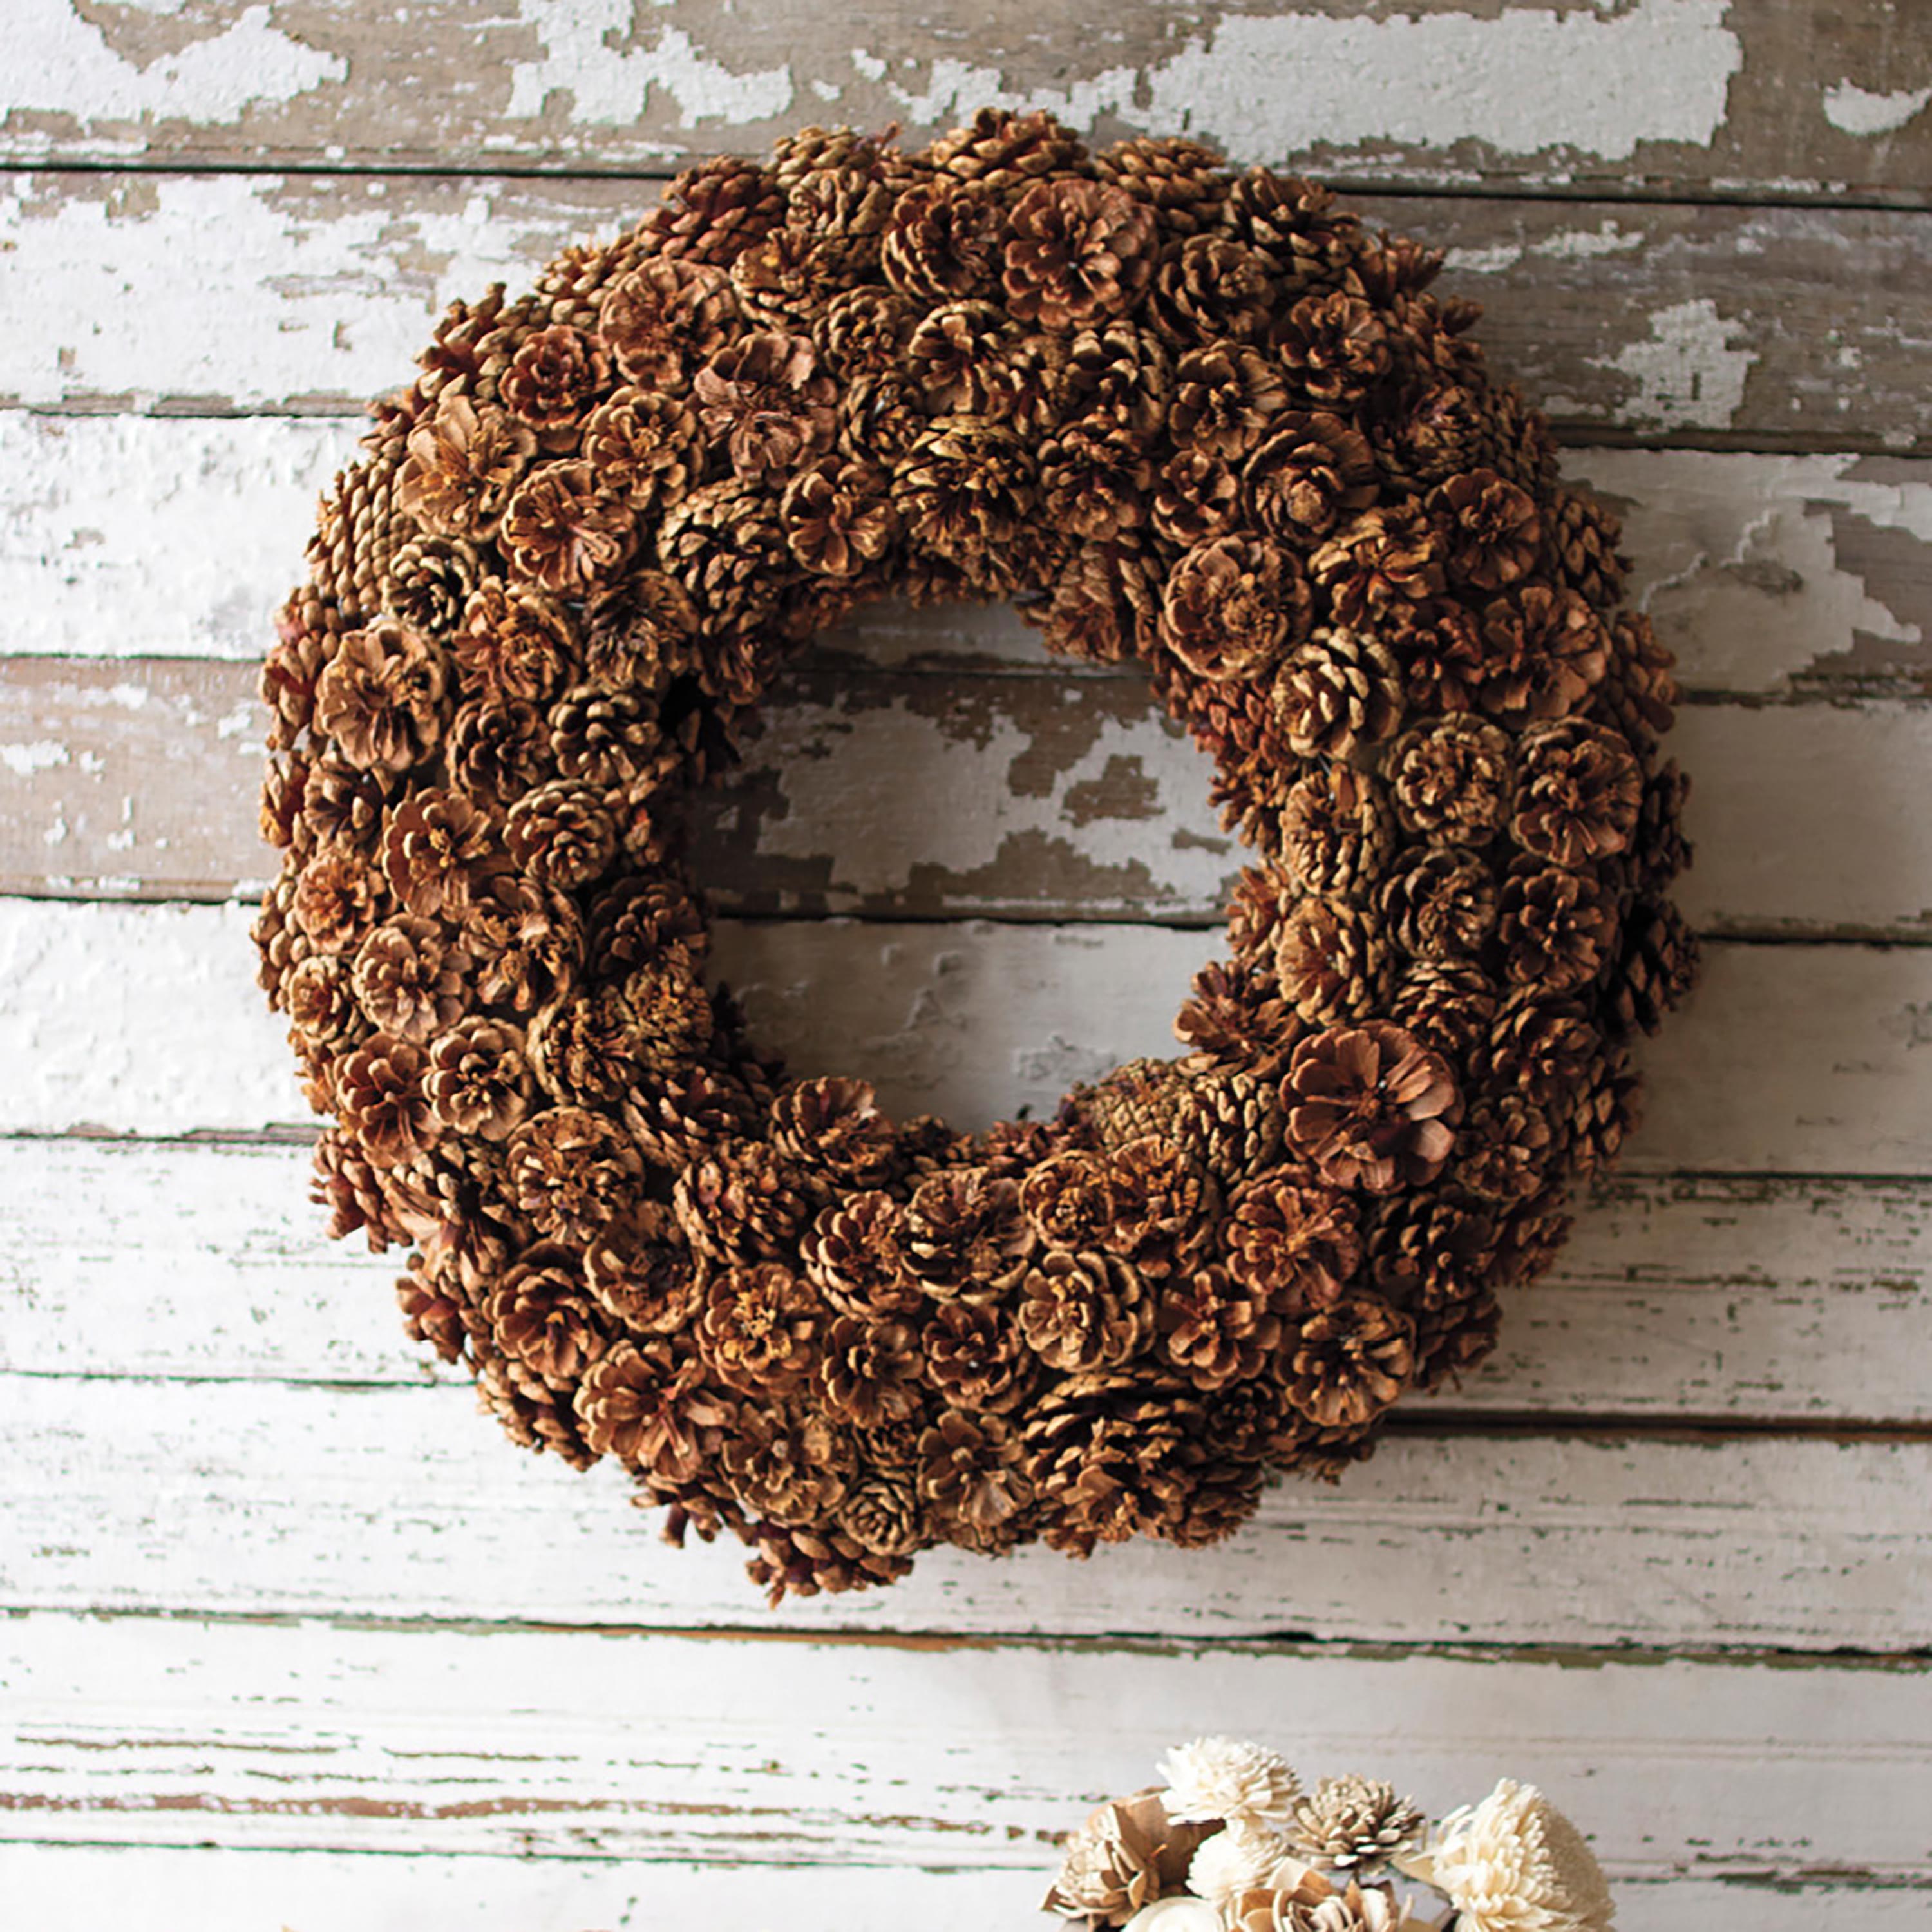 Handcrafted Pinecone Wreath